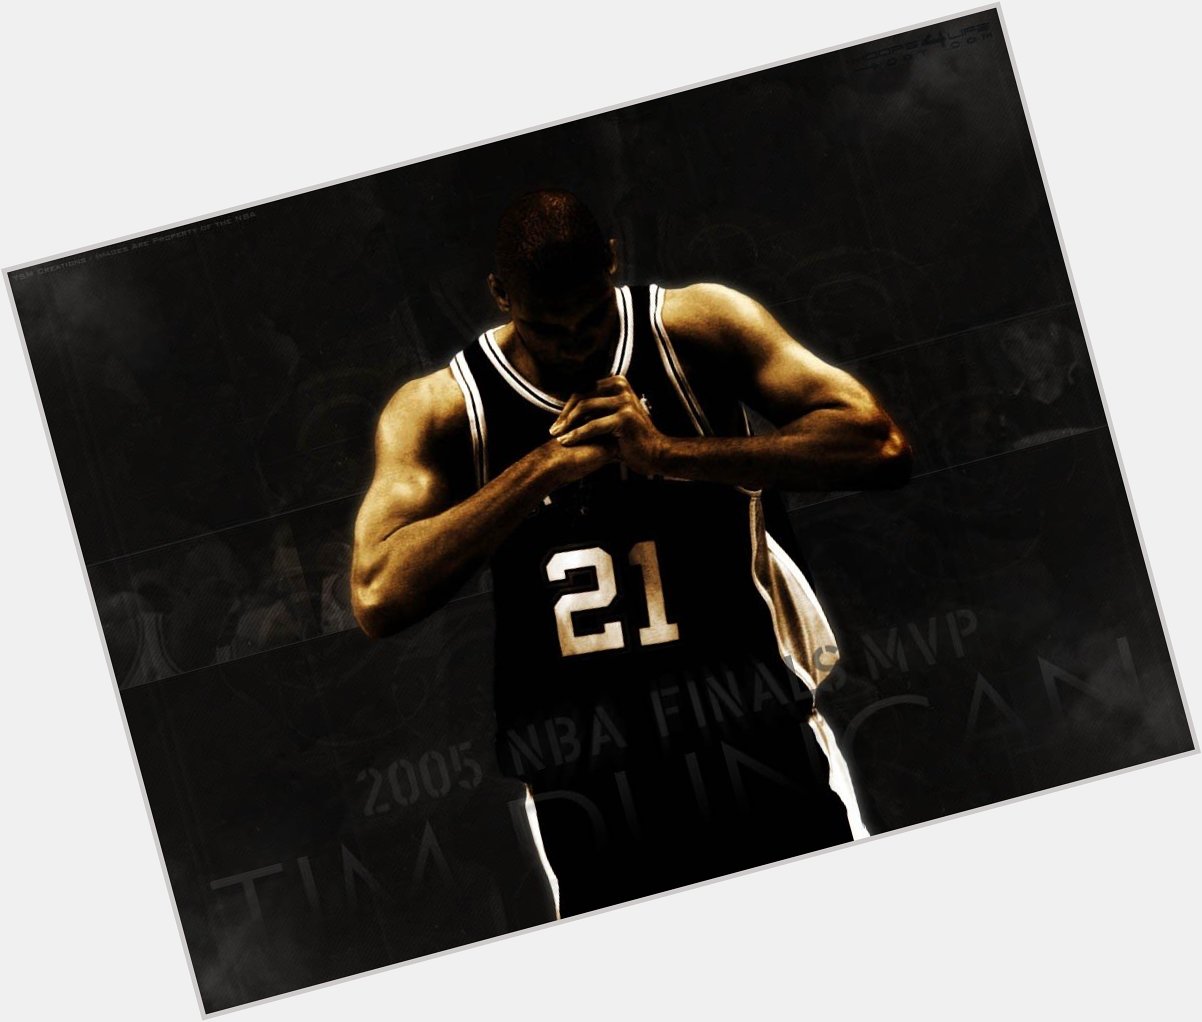 Happy Birthday to my all time favorite Tim Duncan!   